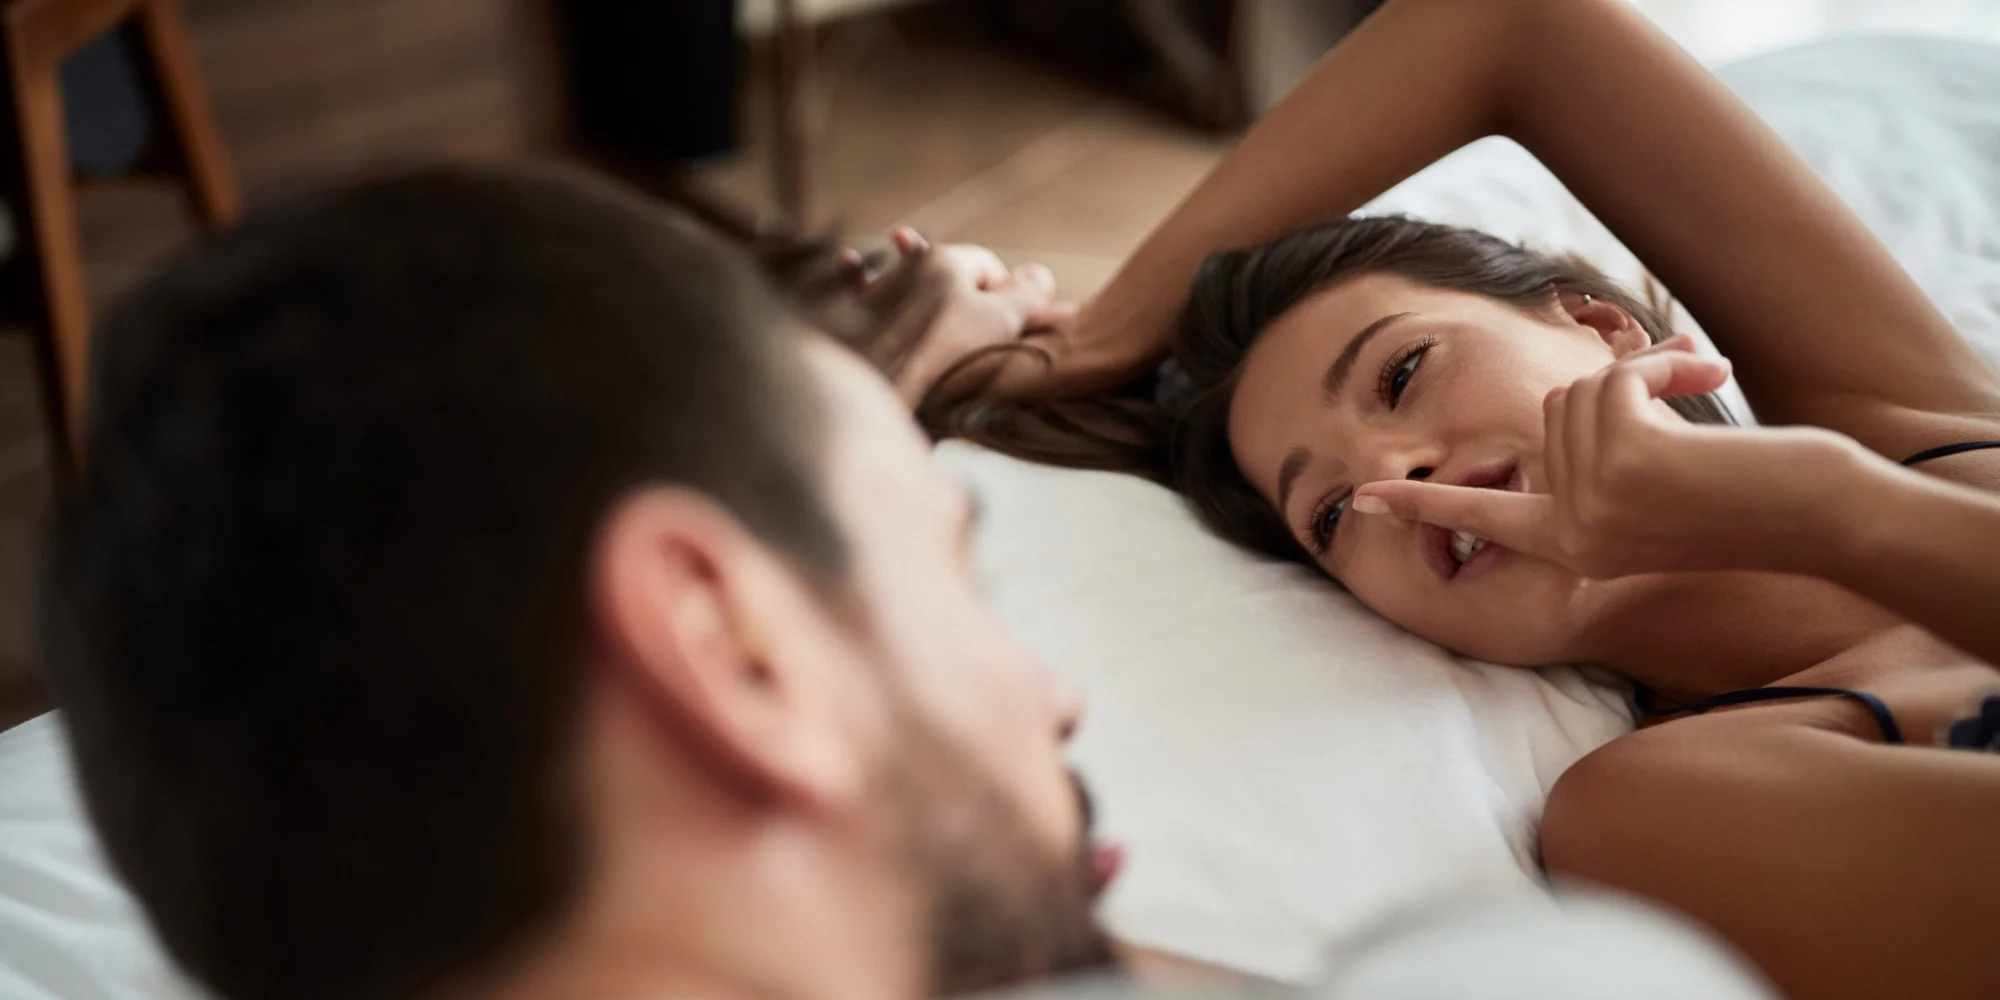 What to Do When Your Partner's Sex Fantasy Freaks You Out